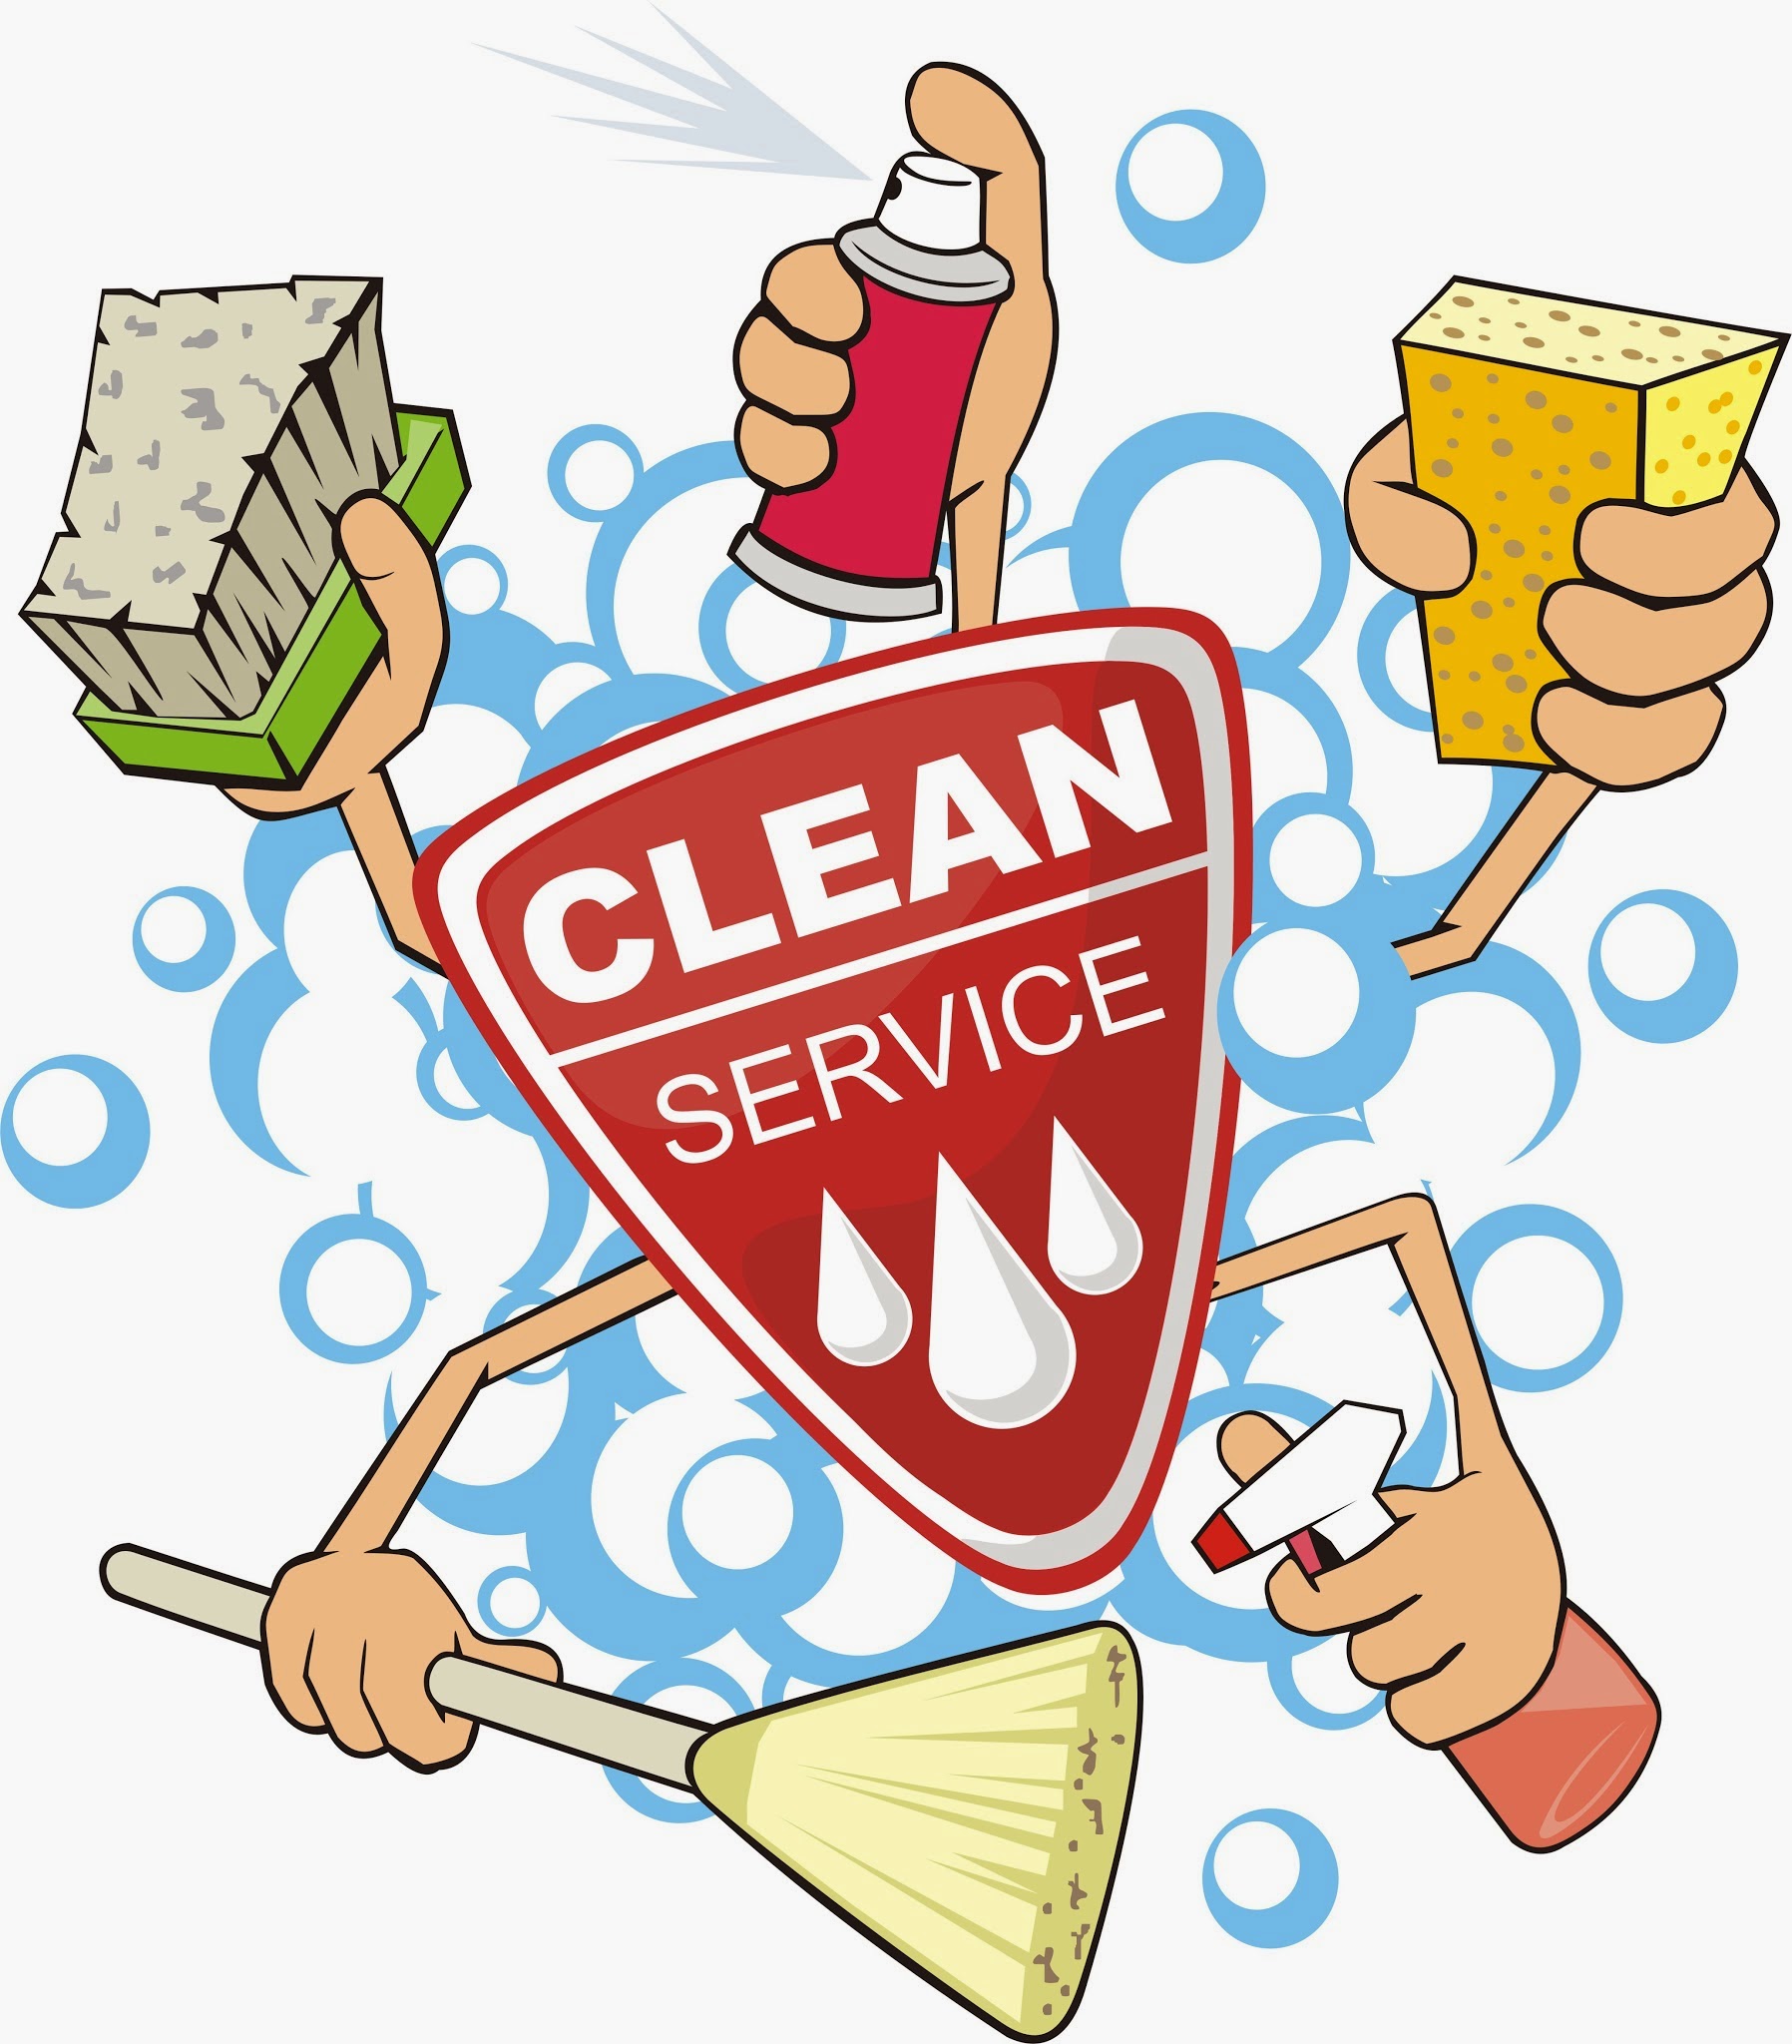 Skipper Cleaning Services for Home and Business - About - Google+